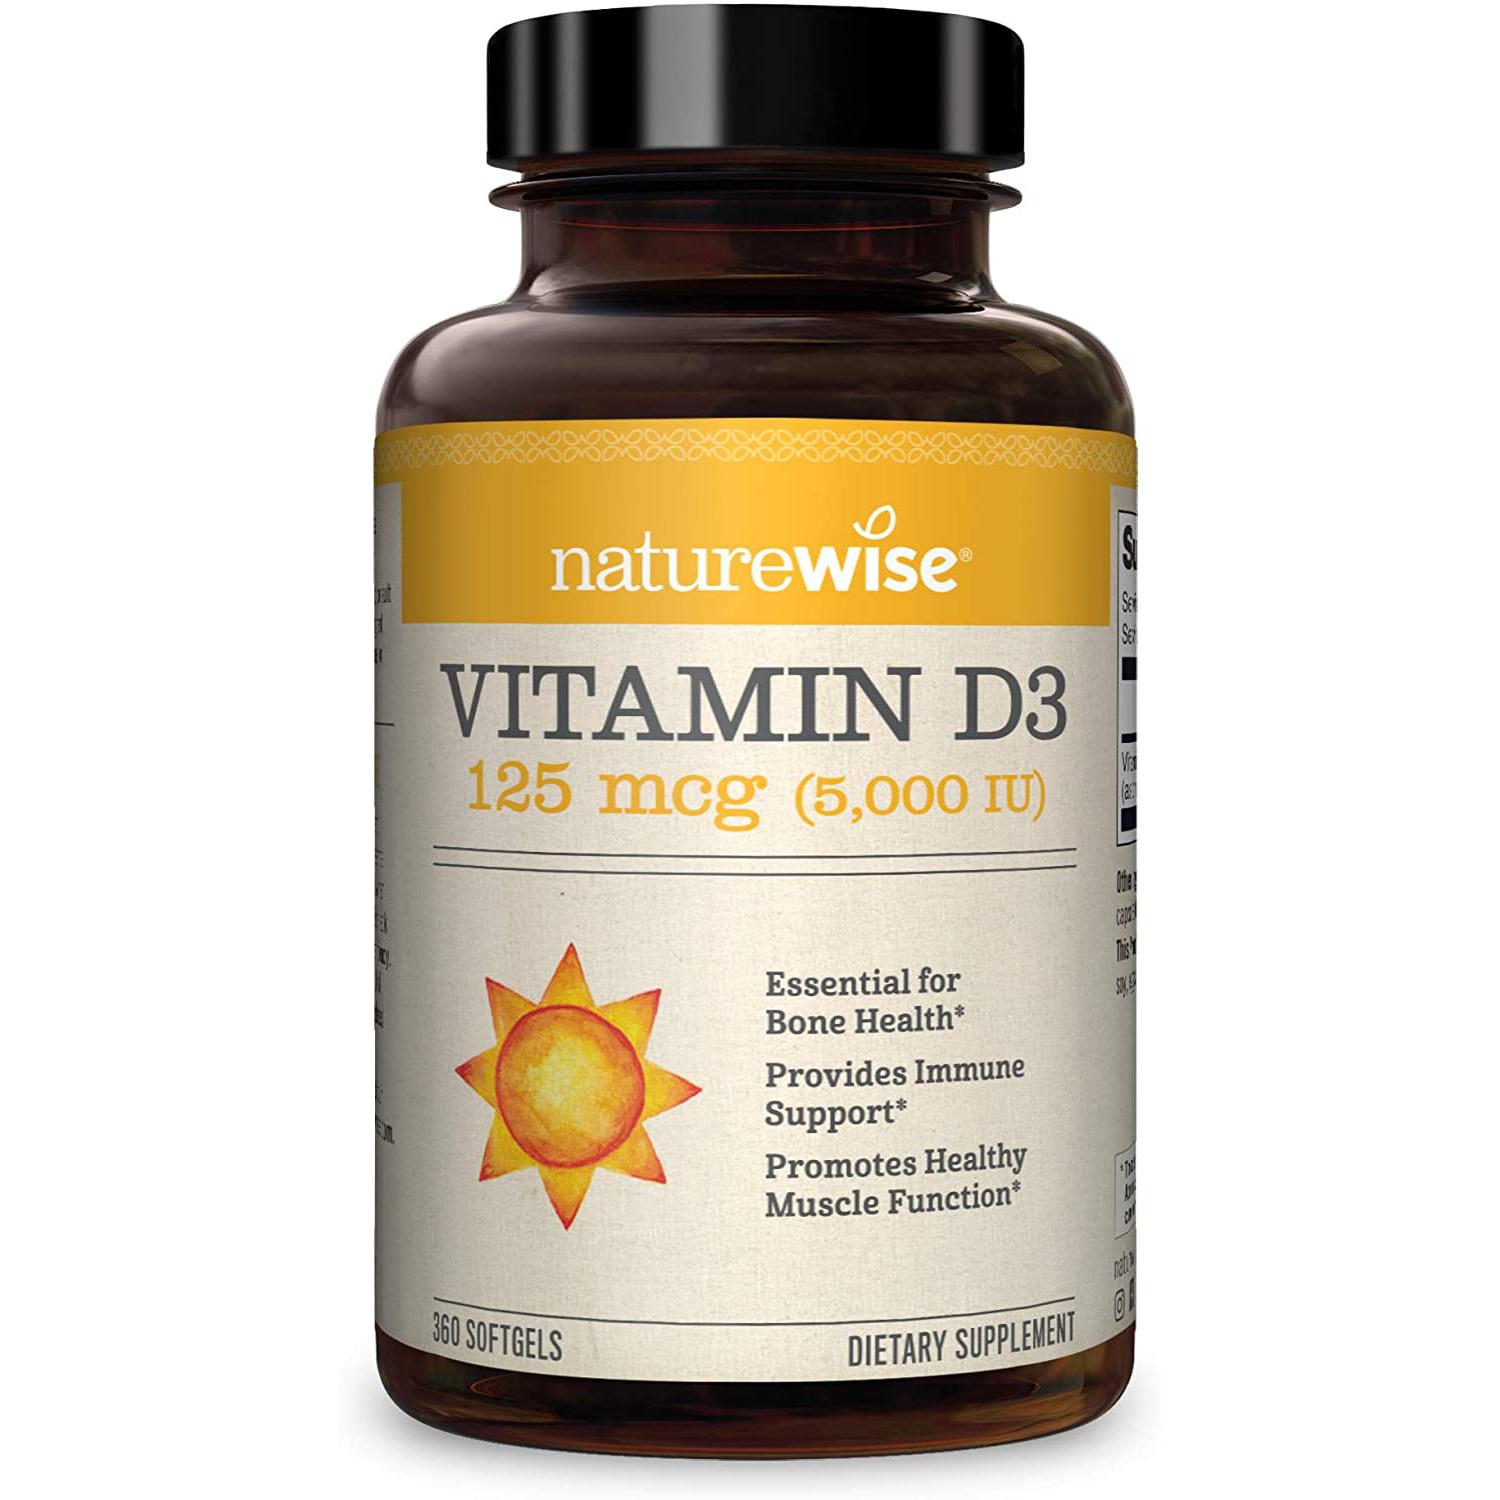 350 NatureWise Vitamin D3 5000 IU Softgels for $5.85 Shipped